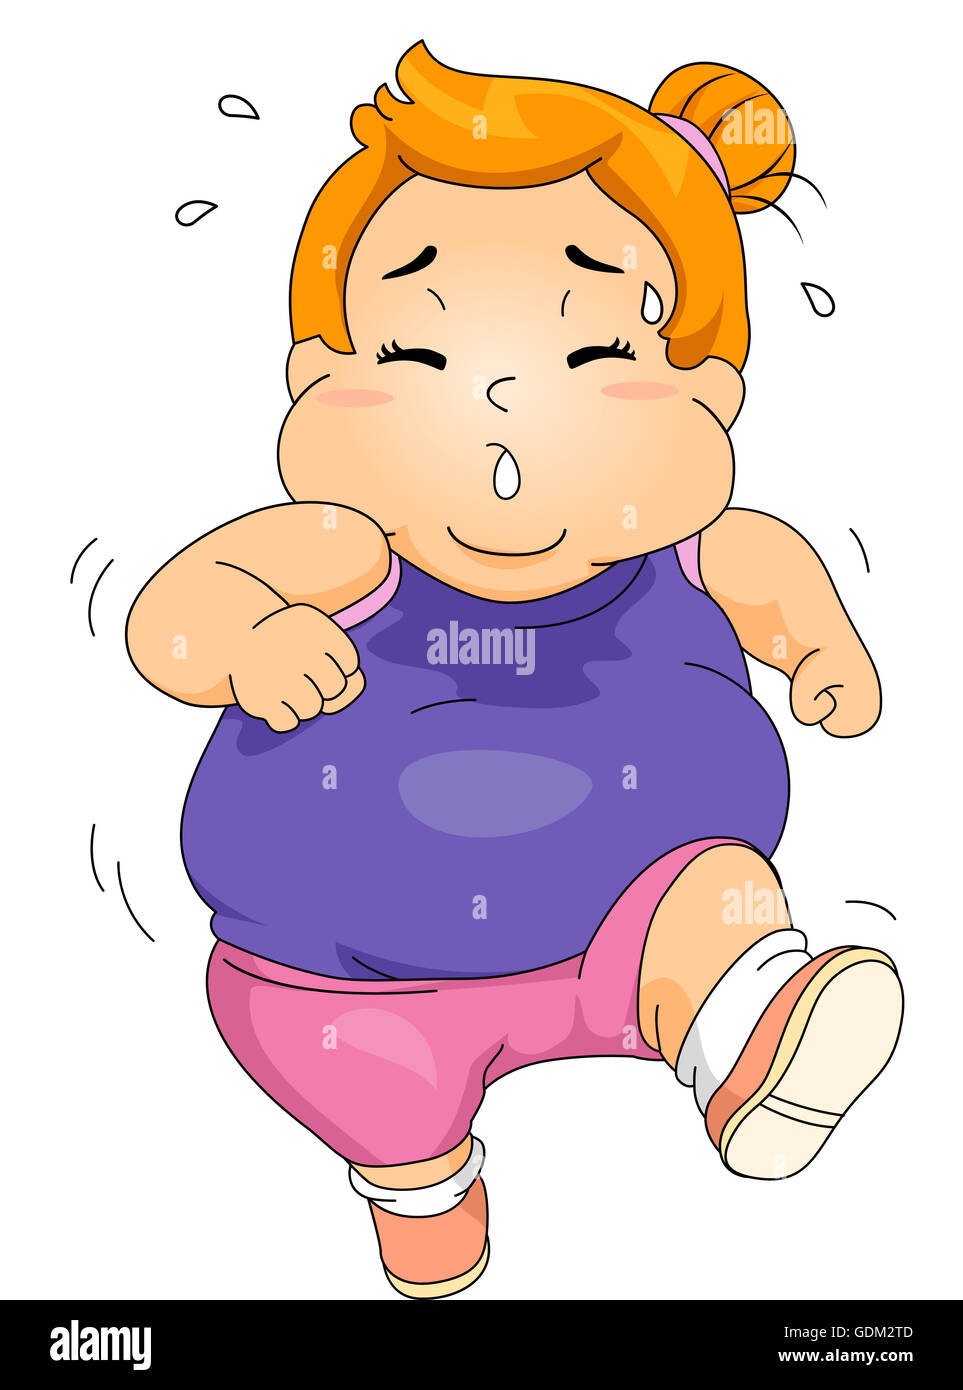 Illustration of an Obese Girl Sweating Profusely While Jogging Stock Photo